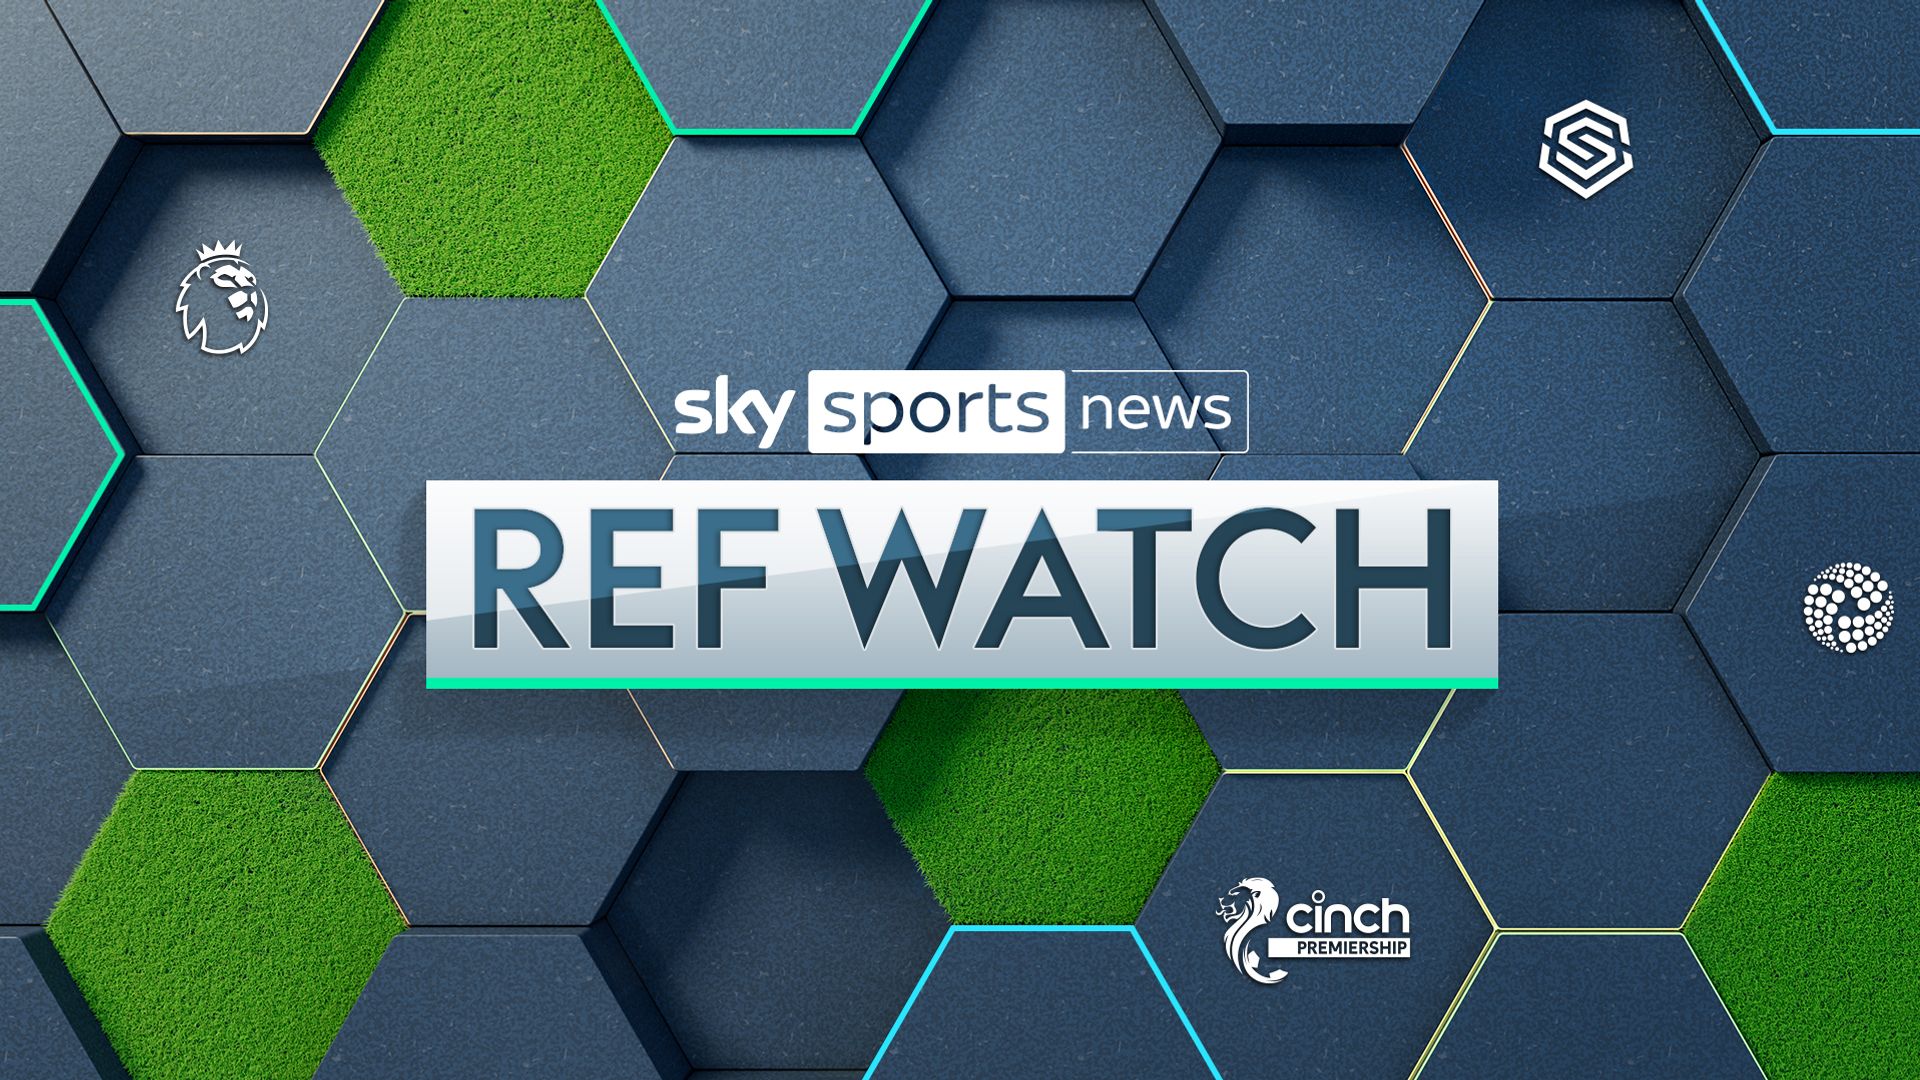 Ref Watch LIVE! Dermot: Lack of focus and judgement by the VAR